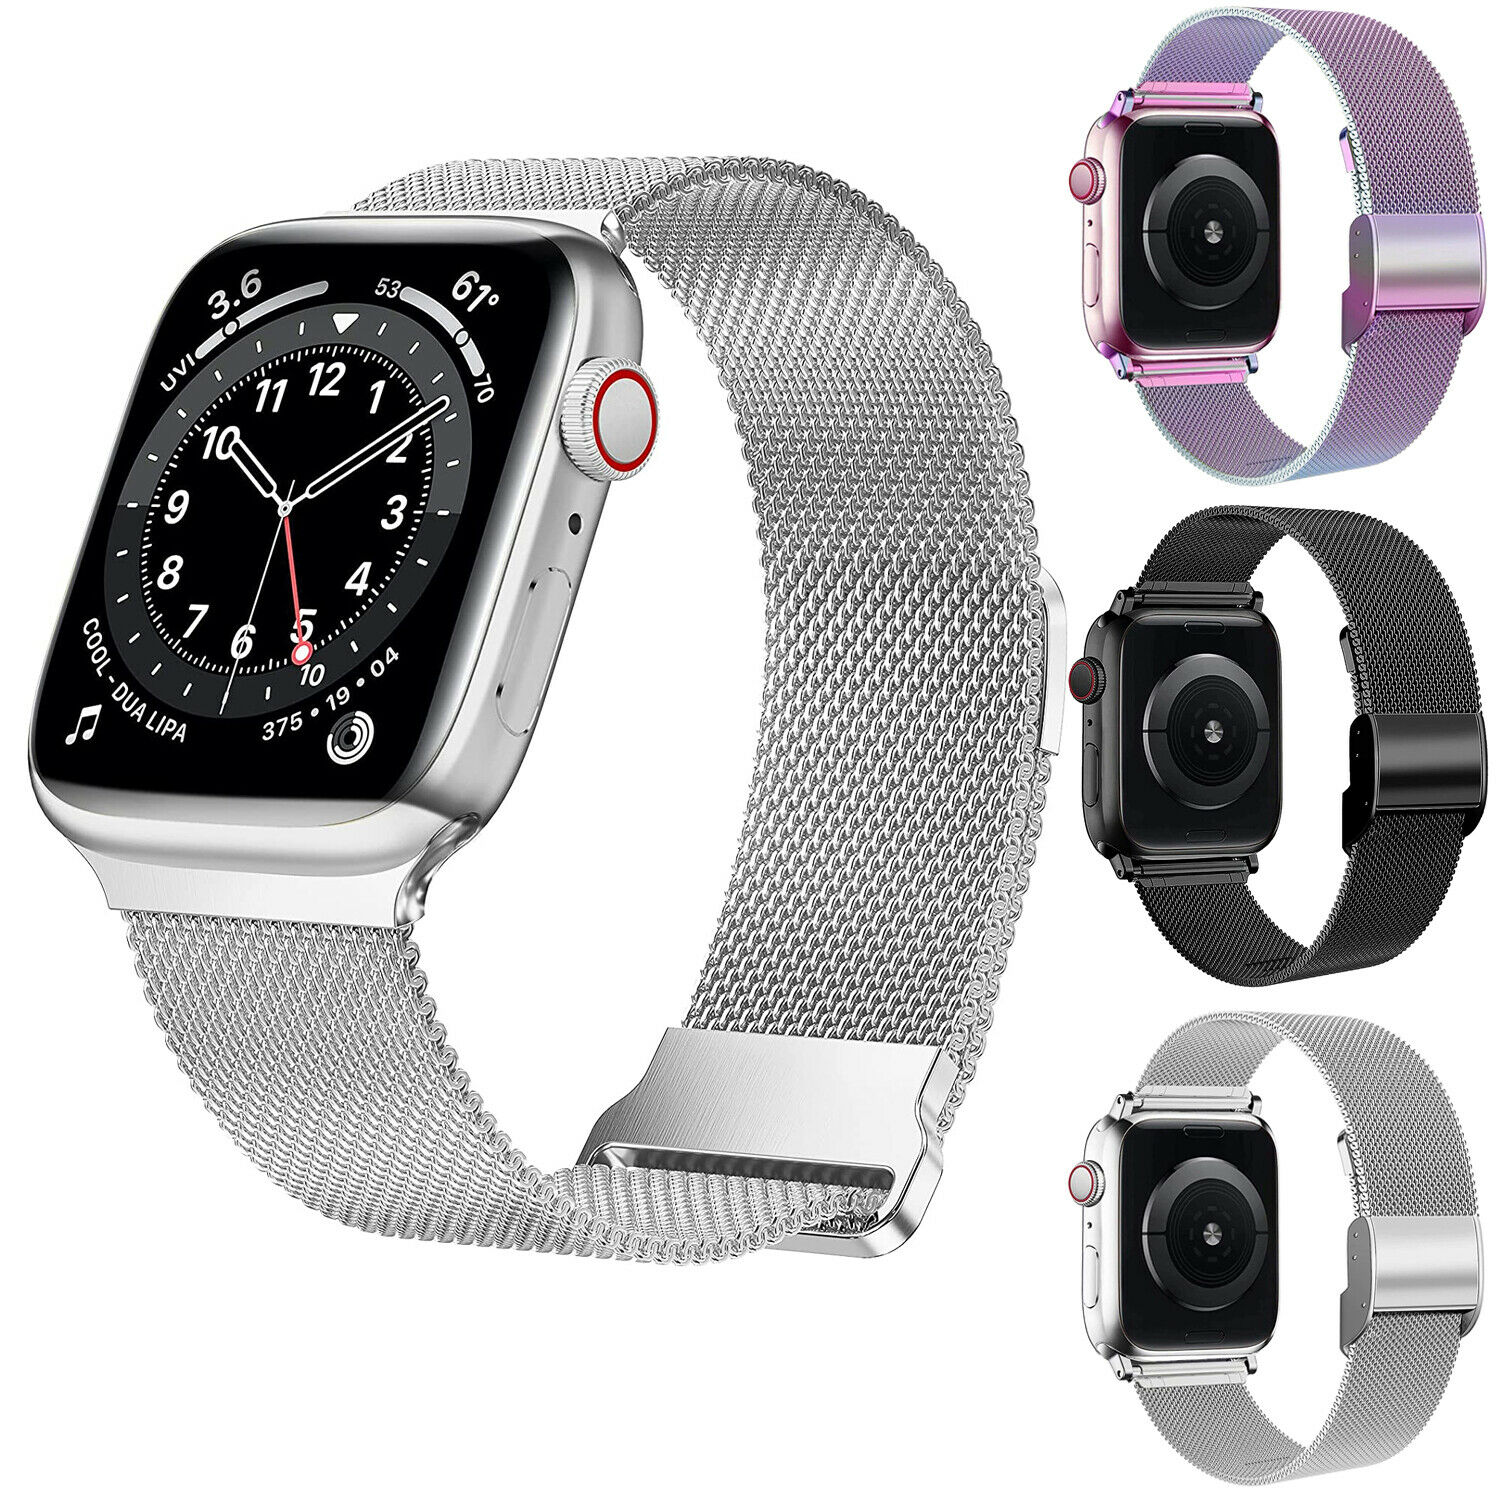 Apple Watch Bands For Women, Apple Watch Bands For Men